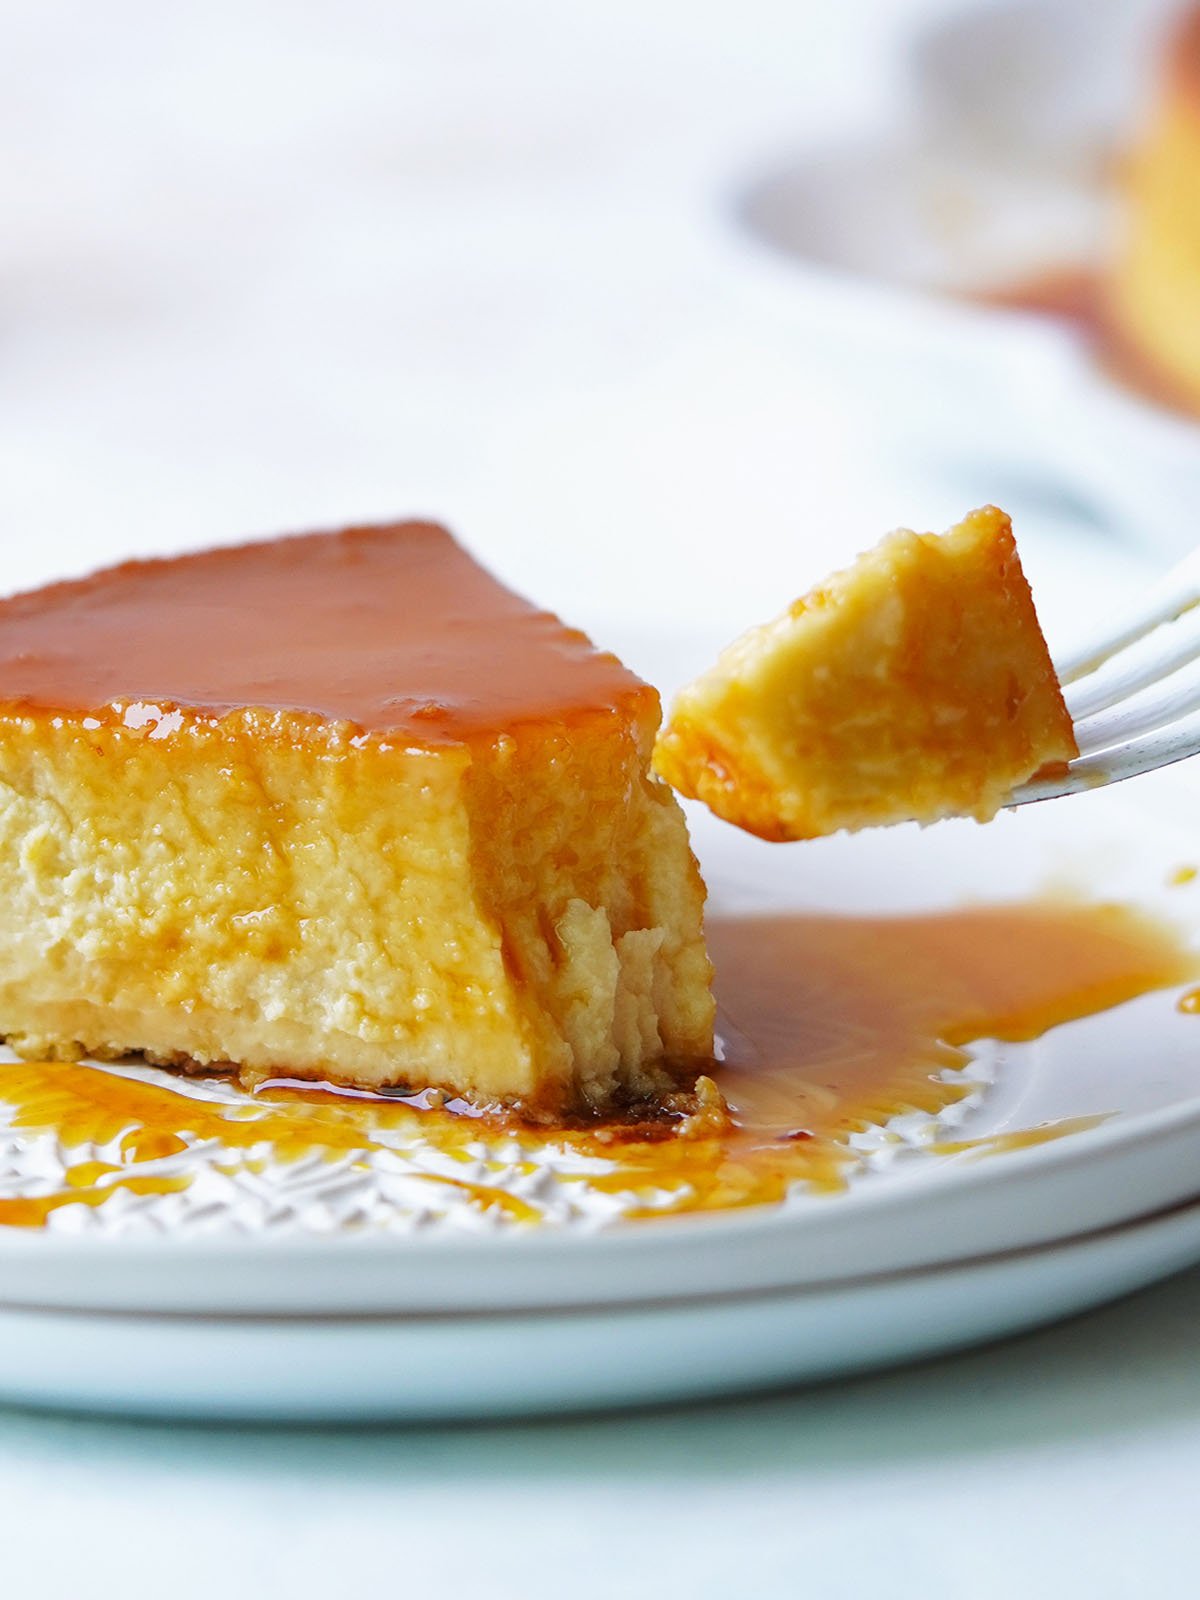 How To Make Mexican Flan (From Scratch)